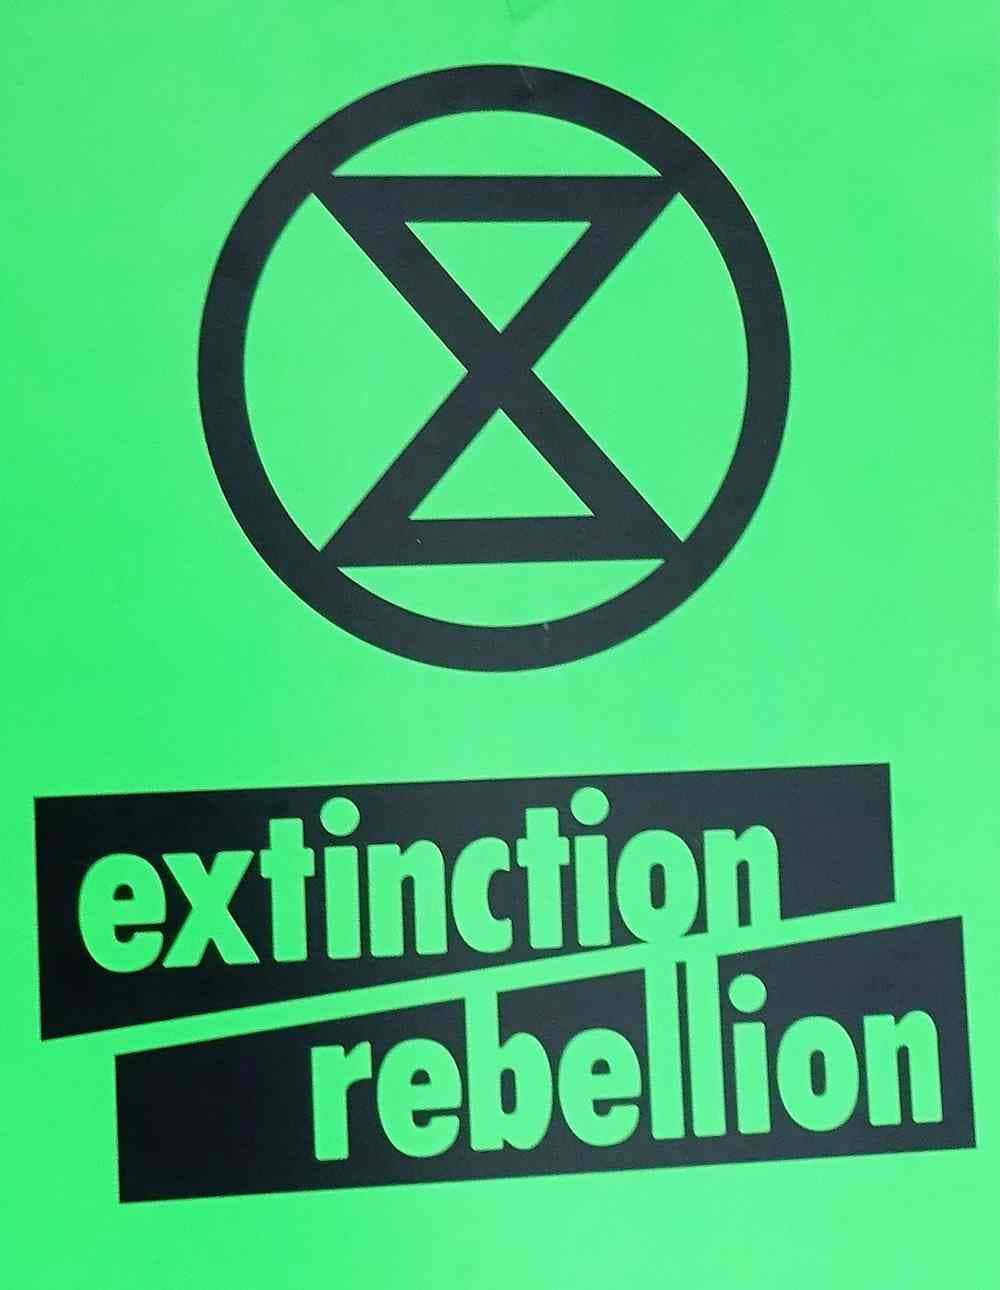 poster of the Extinction rebellion movement. Image credit: Wikipedia 